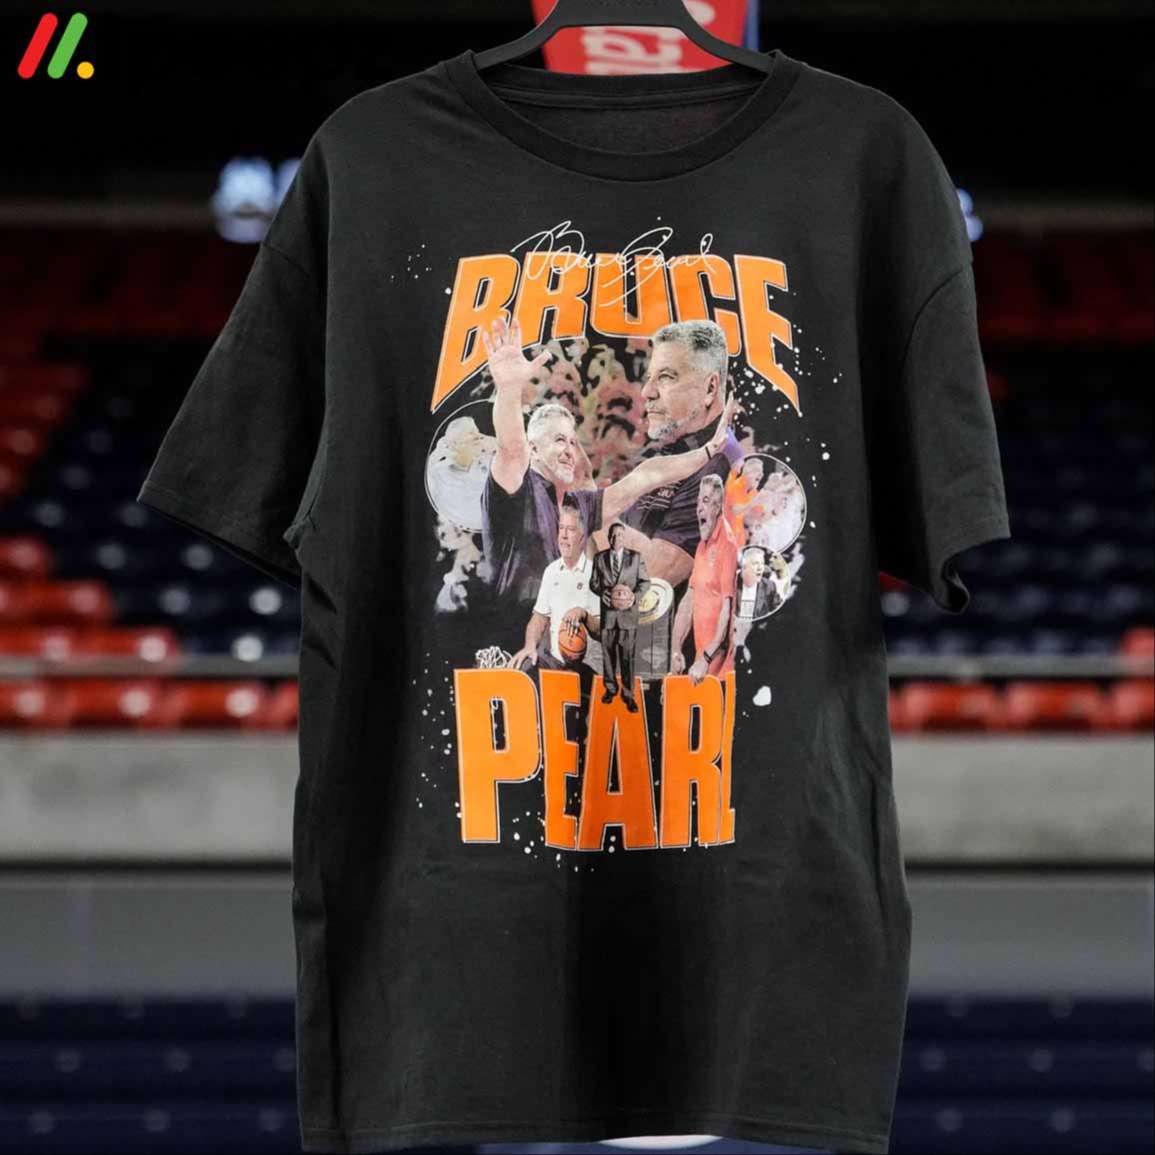 Bruce Pearl 10 Th Year On The Plains Shirt